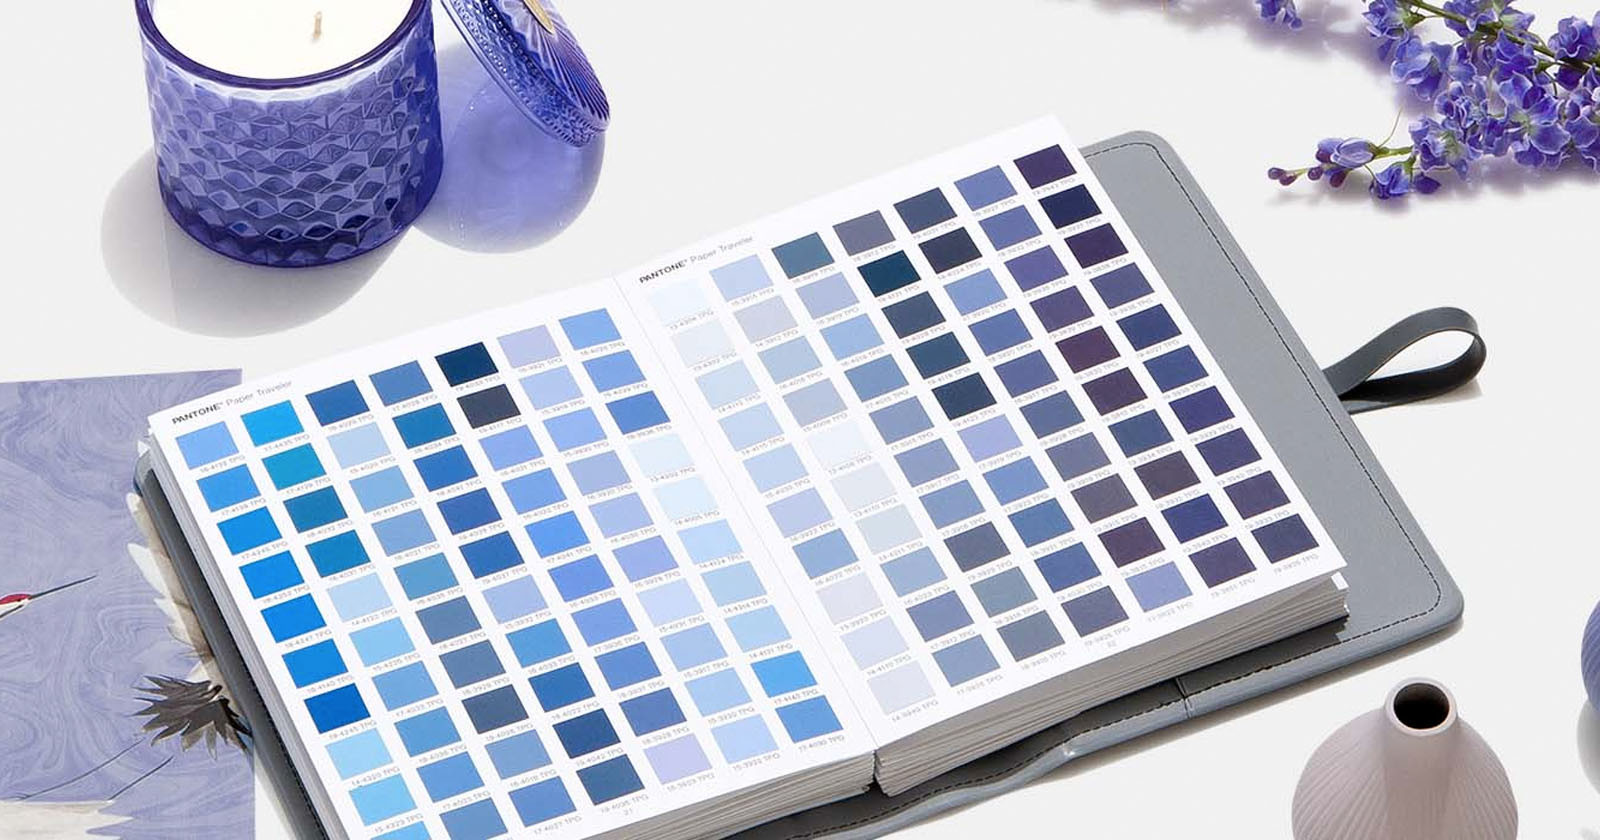 You Have to Pay a Subscription to Use Pantone Colors in Photoshop Now